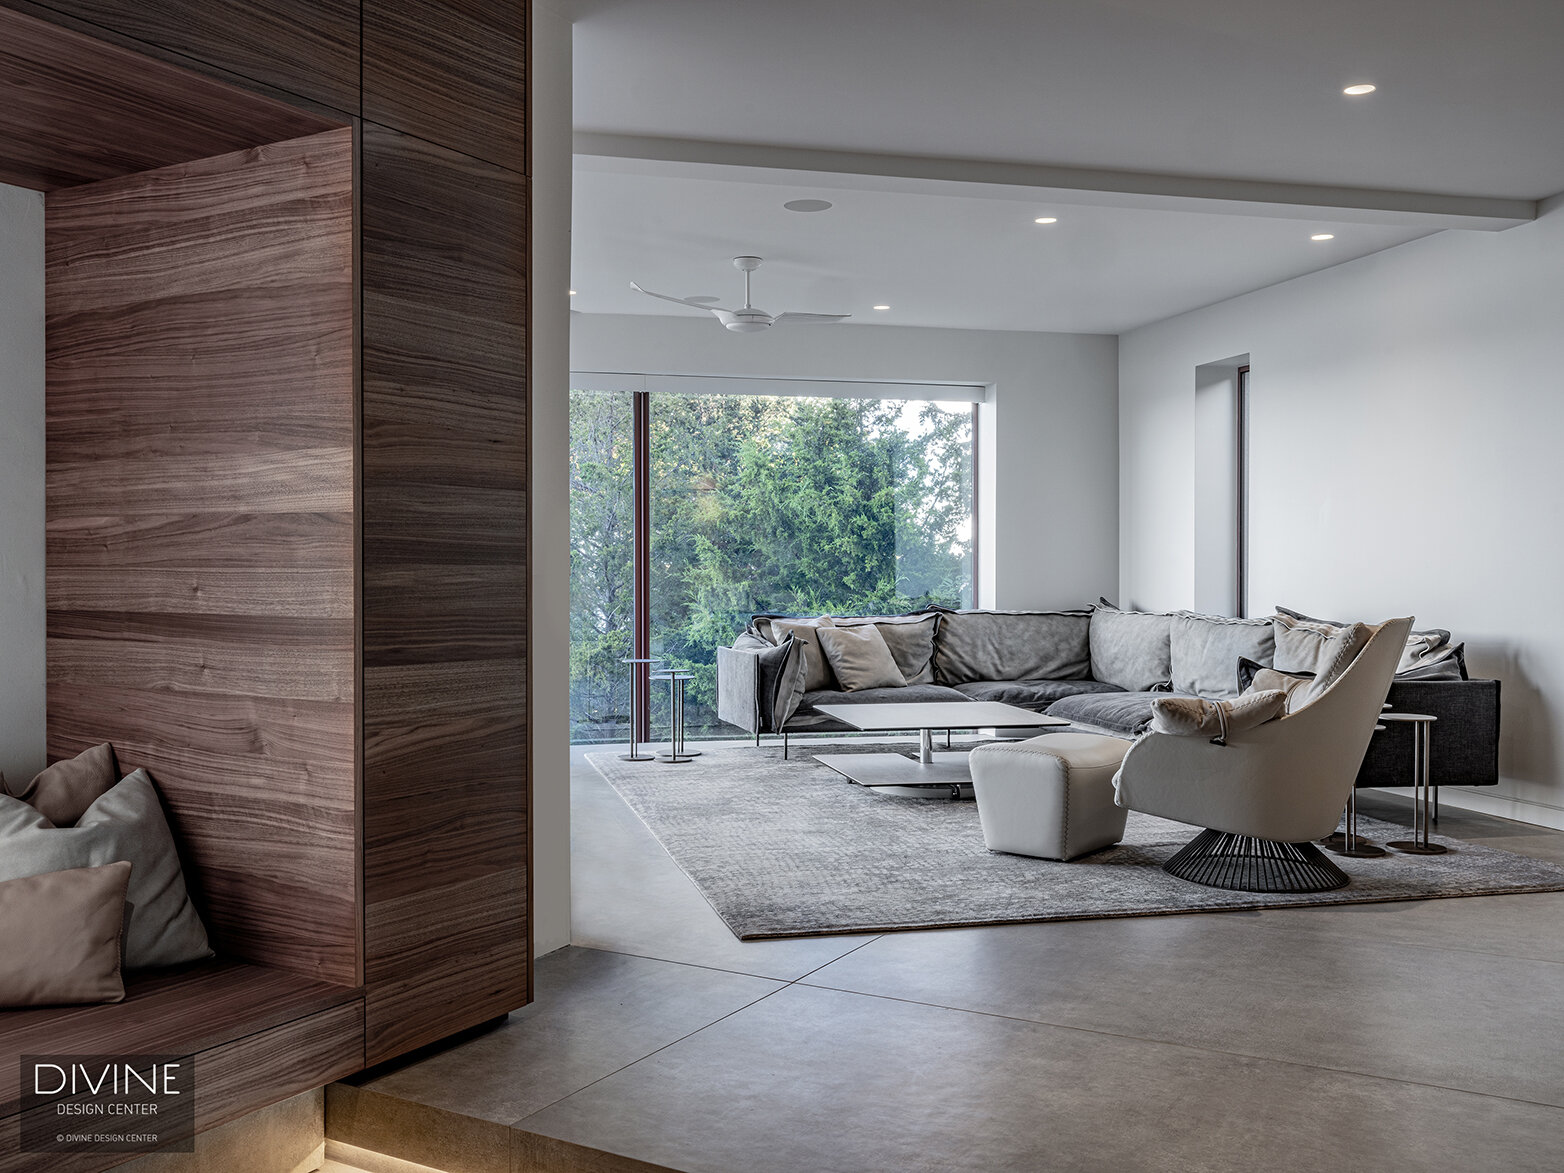  A niche seating area in walnut in the forefront in the step down of a concrete step with architectural lighting below - in the background is a large living area in cool, grey tones with Leolux and Rolf Benz furniture of a similar modern style. A lar